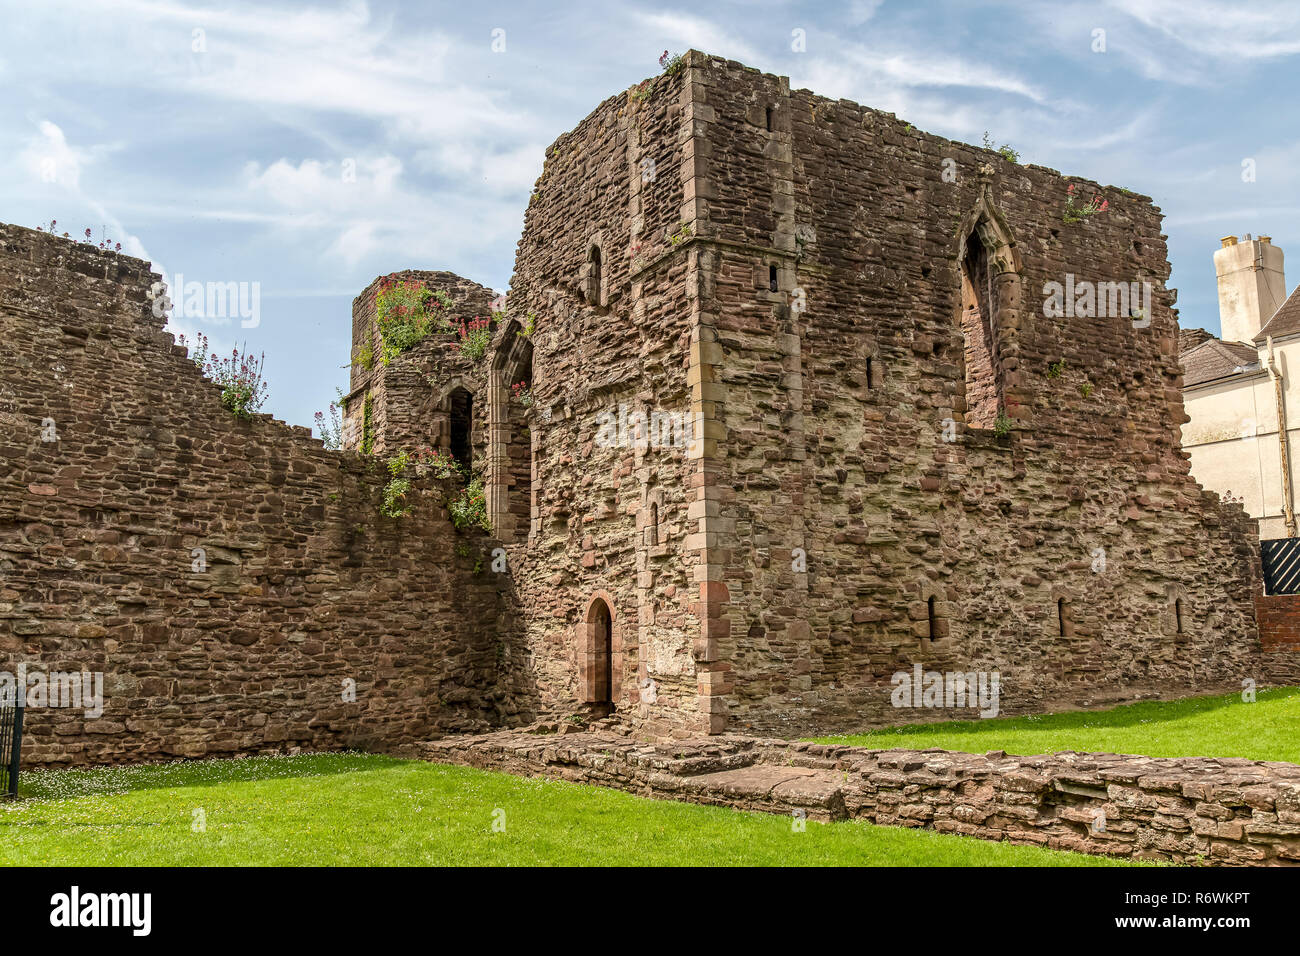 The ruins of Monmouth Castle, once an important border castle, and birthplace of Henry V of England. It's origins date back between 1066 and 1069. Stock Photo